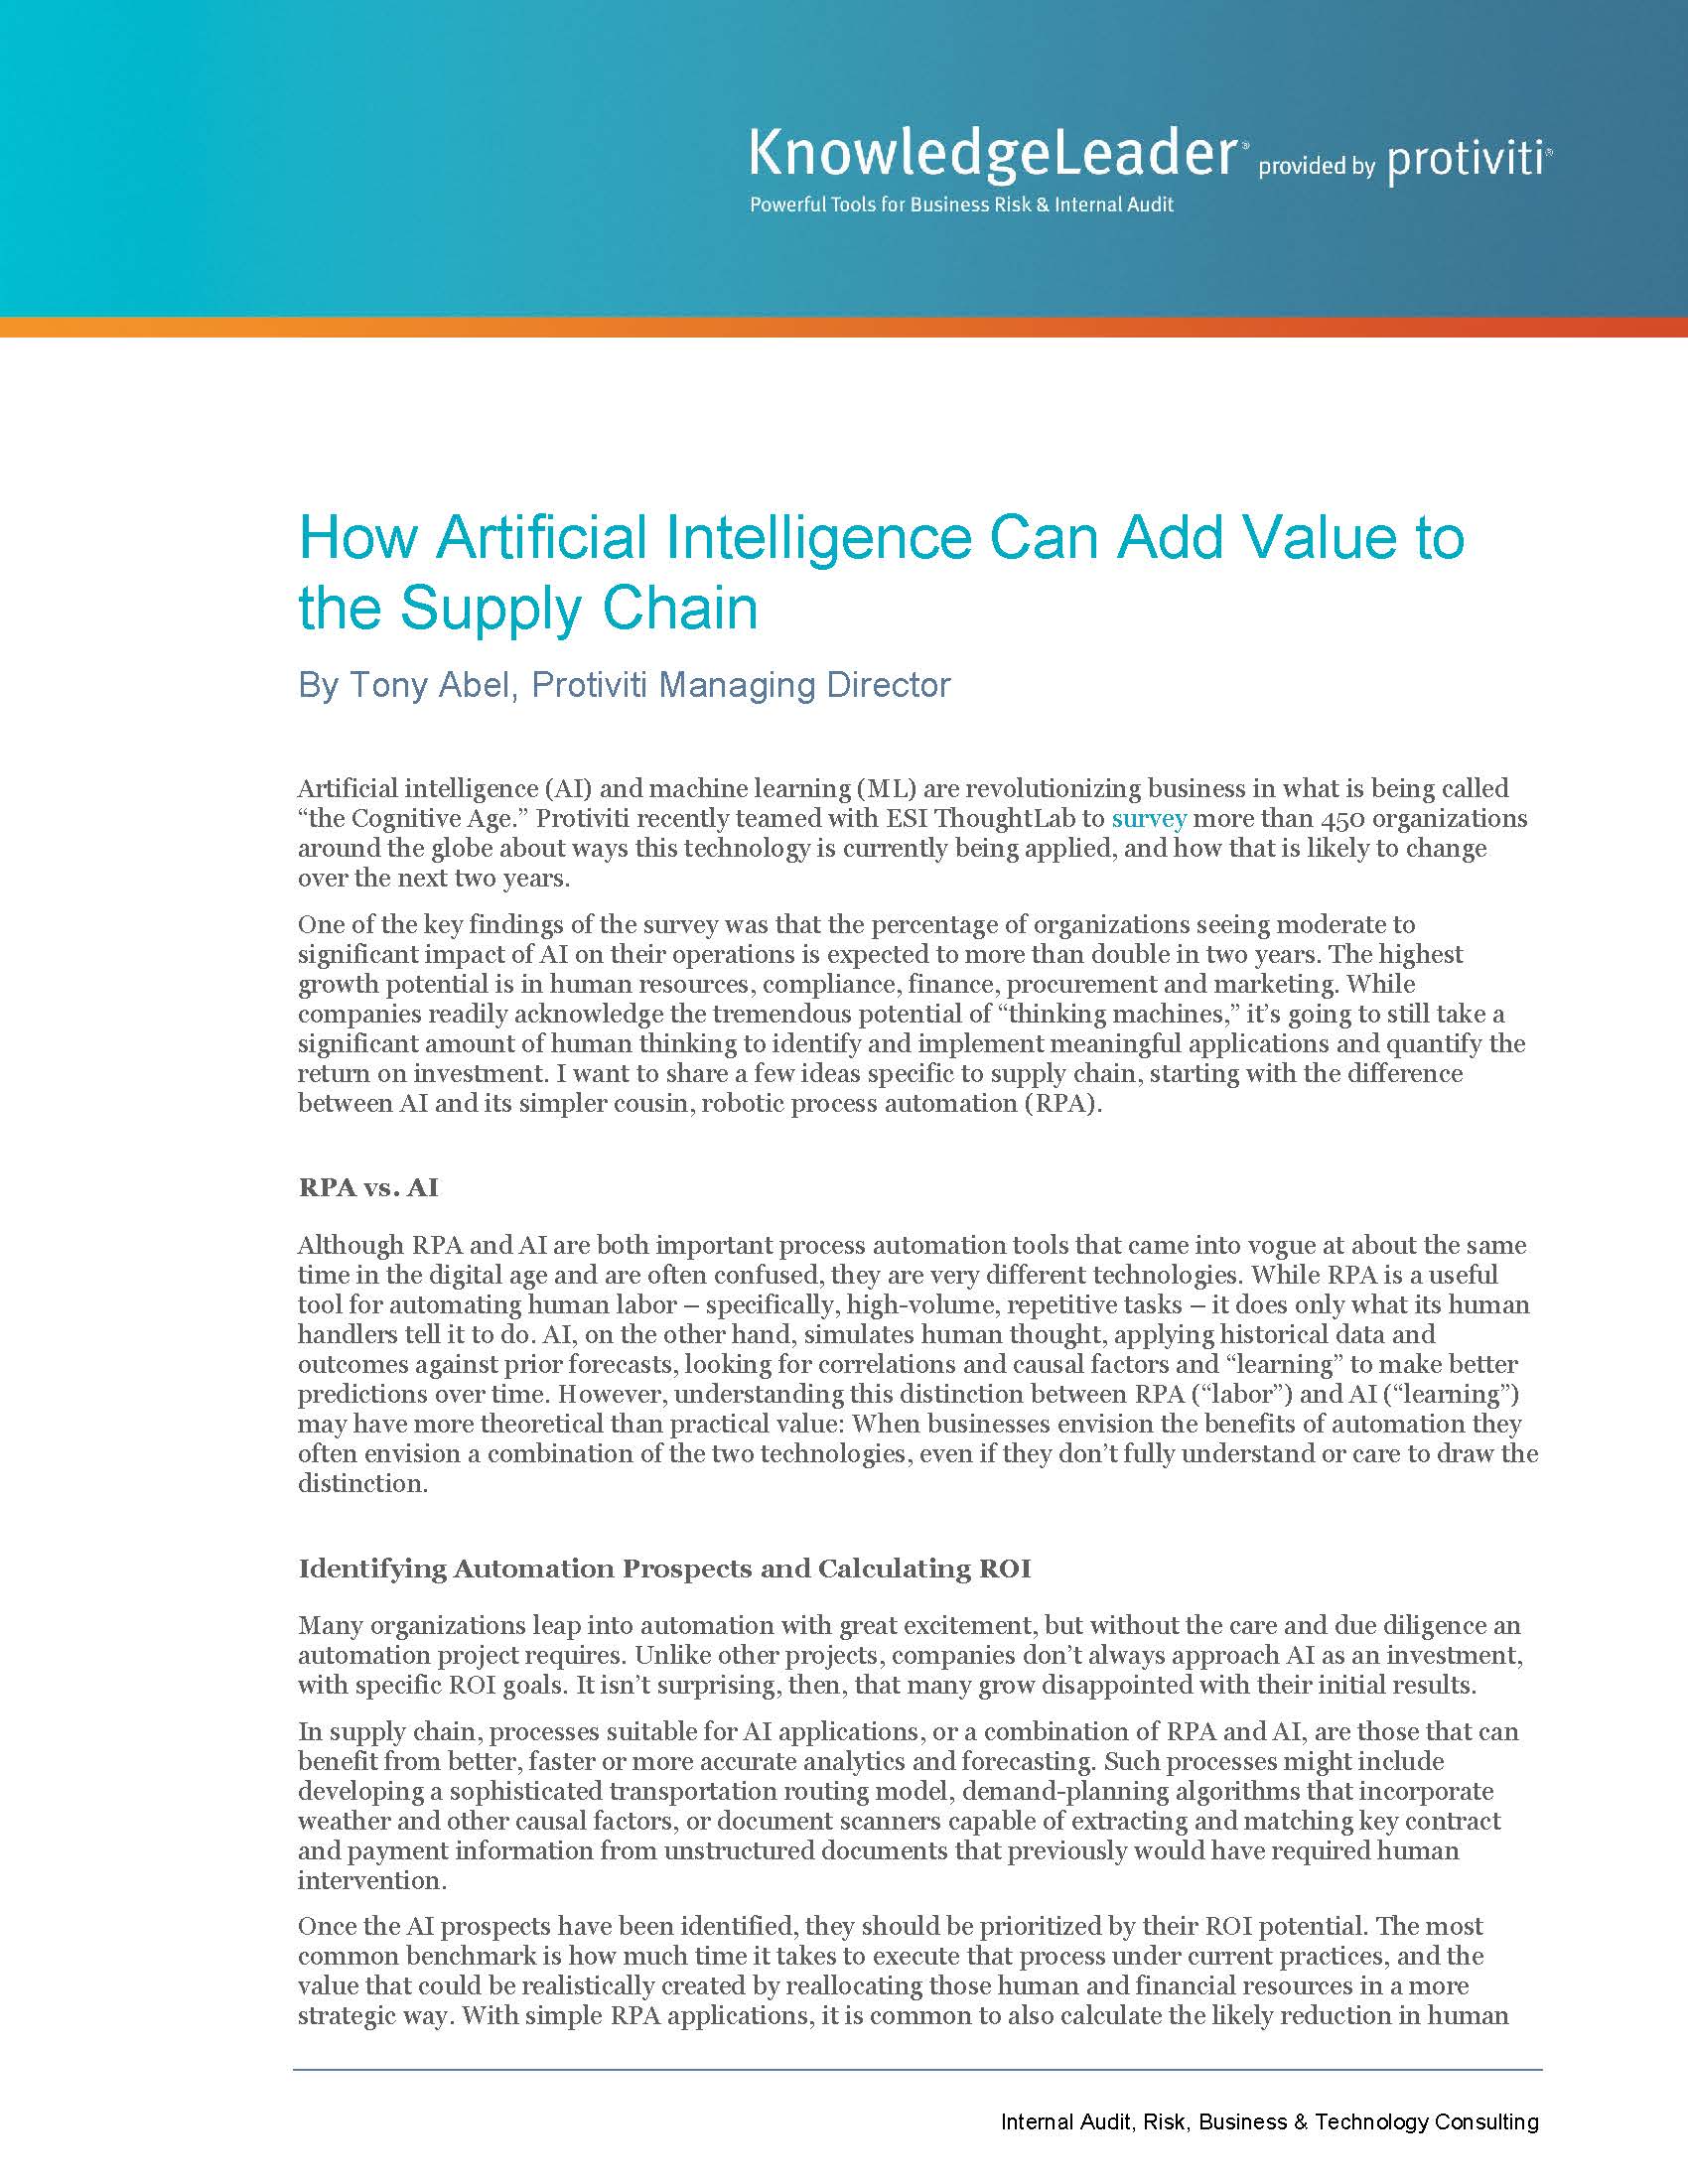 Screenshot of the first page of How Artificial Intelligence Can Add Value to the Supply Chain